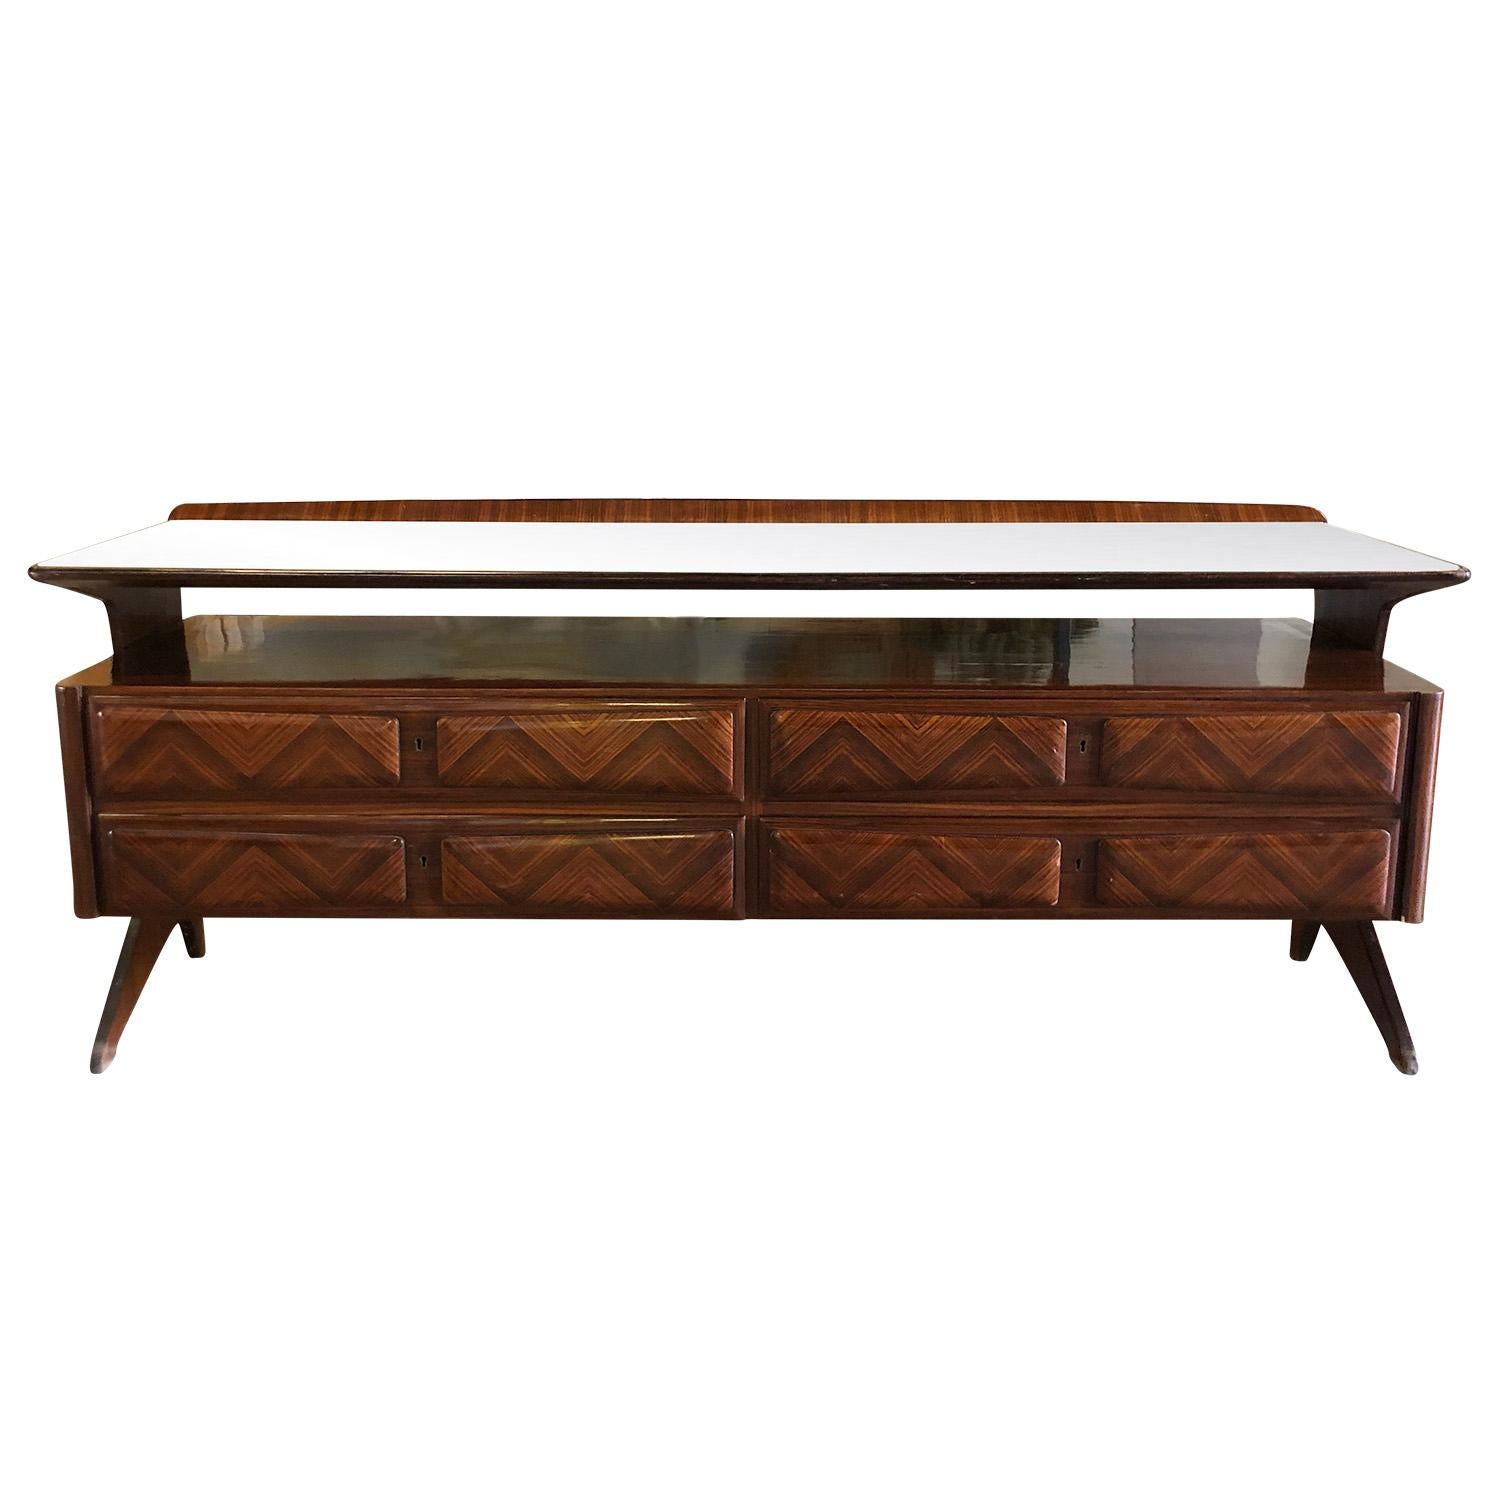 A brown, vintage Mid-Century Modern Italian credenza made of hand crafted lacquered palisanderwood with four drawers and a glass top, designed by Vittorio Dassi in good condition. The storage piece is ideal as a traditional sideboard. Stunning